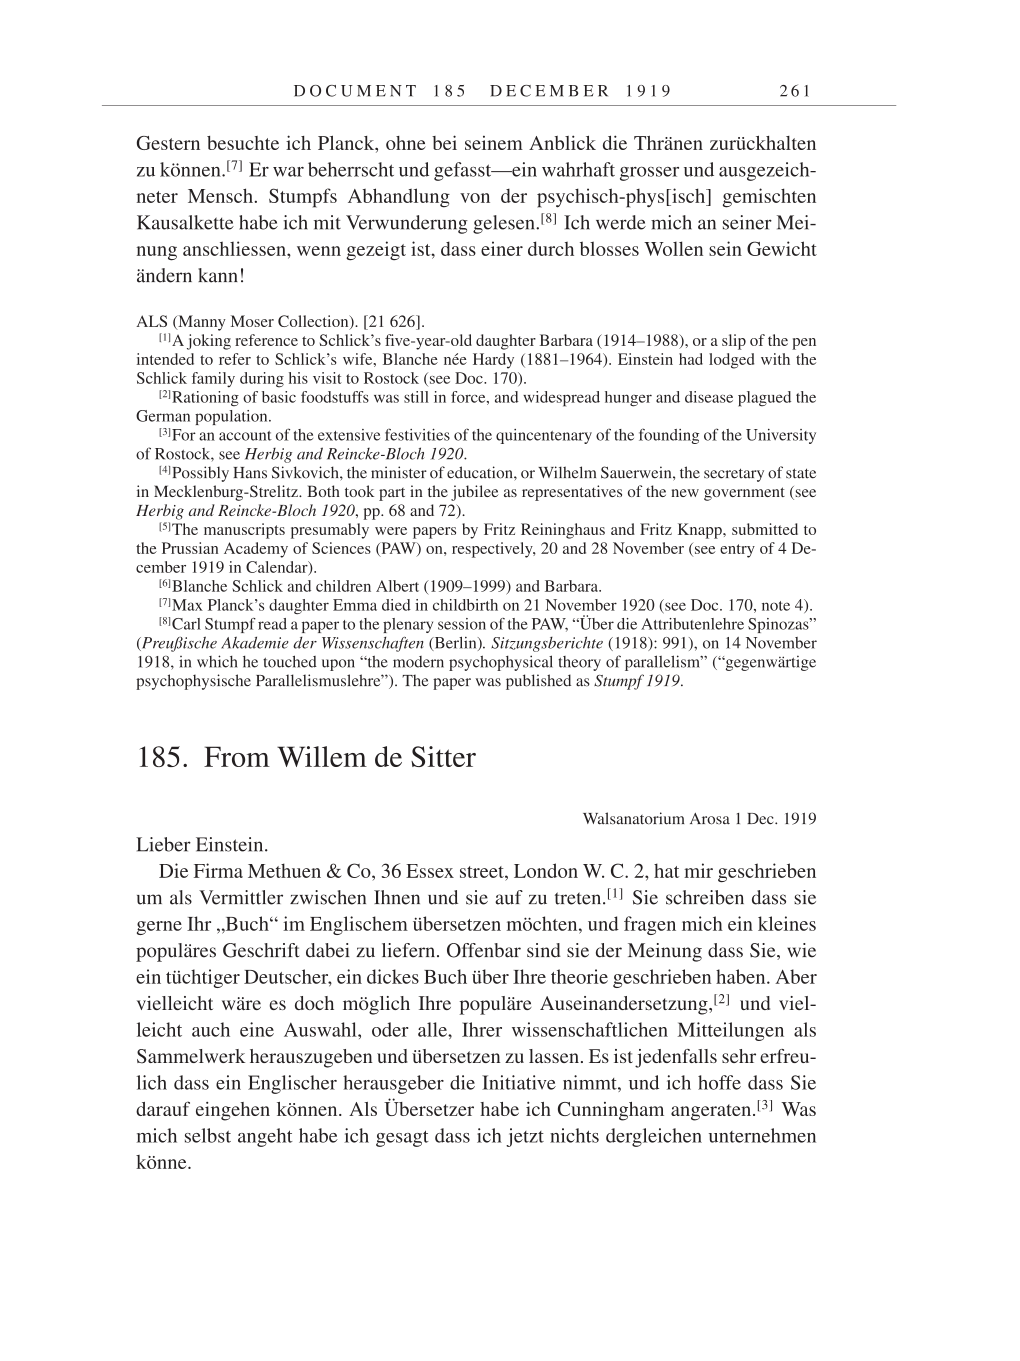 Volume 9: The Berlin Years: Correspondence January 1919-April 1920 page 261